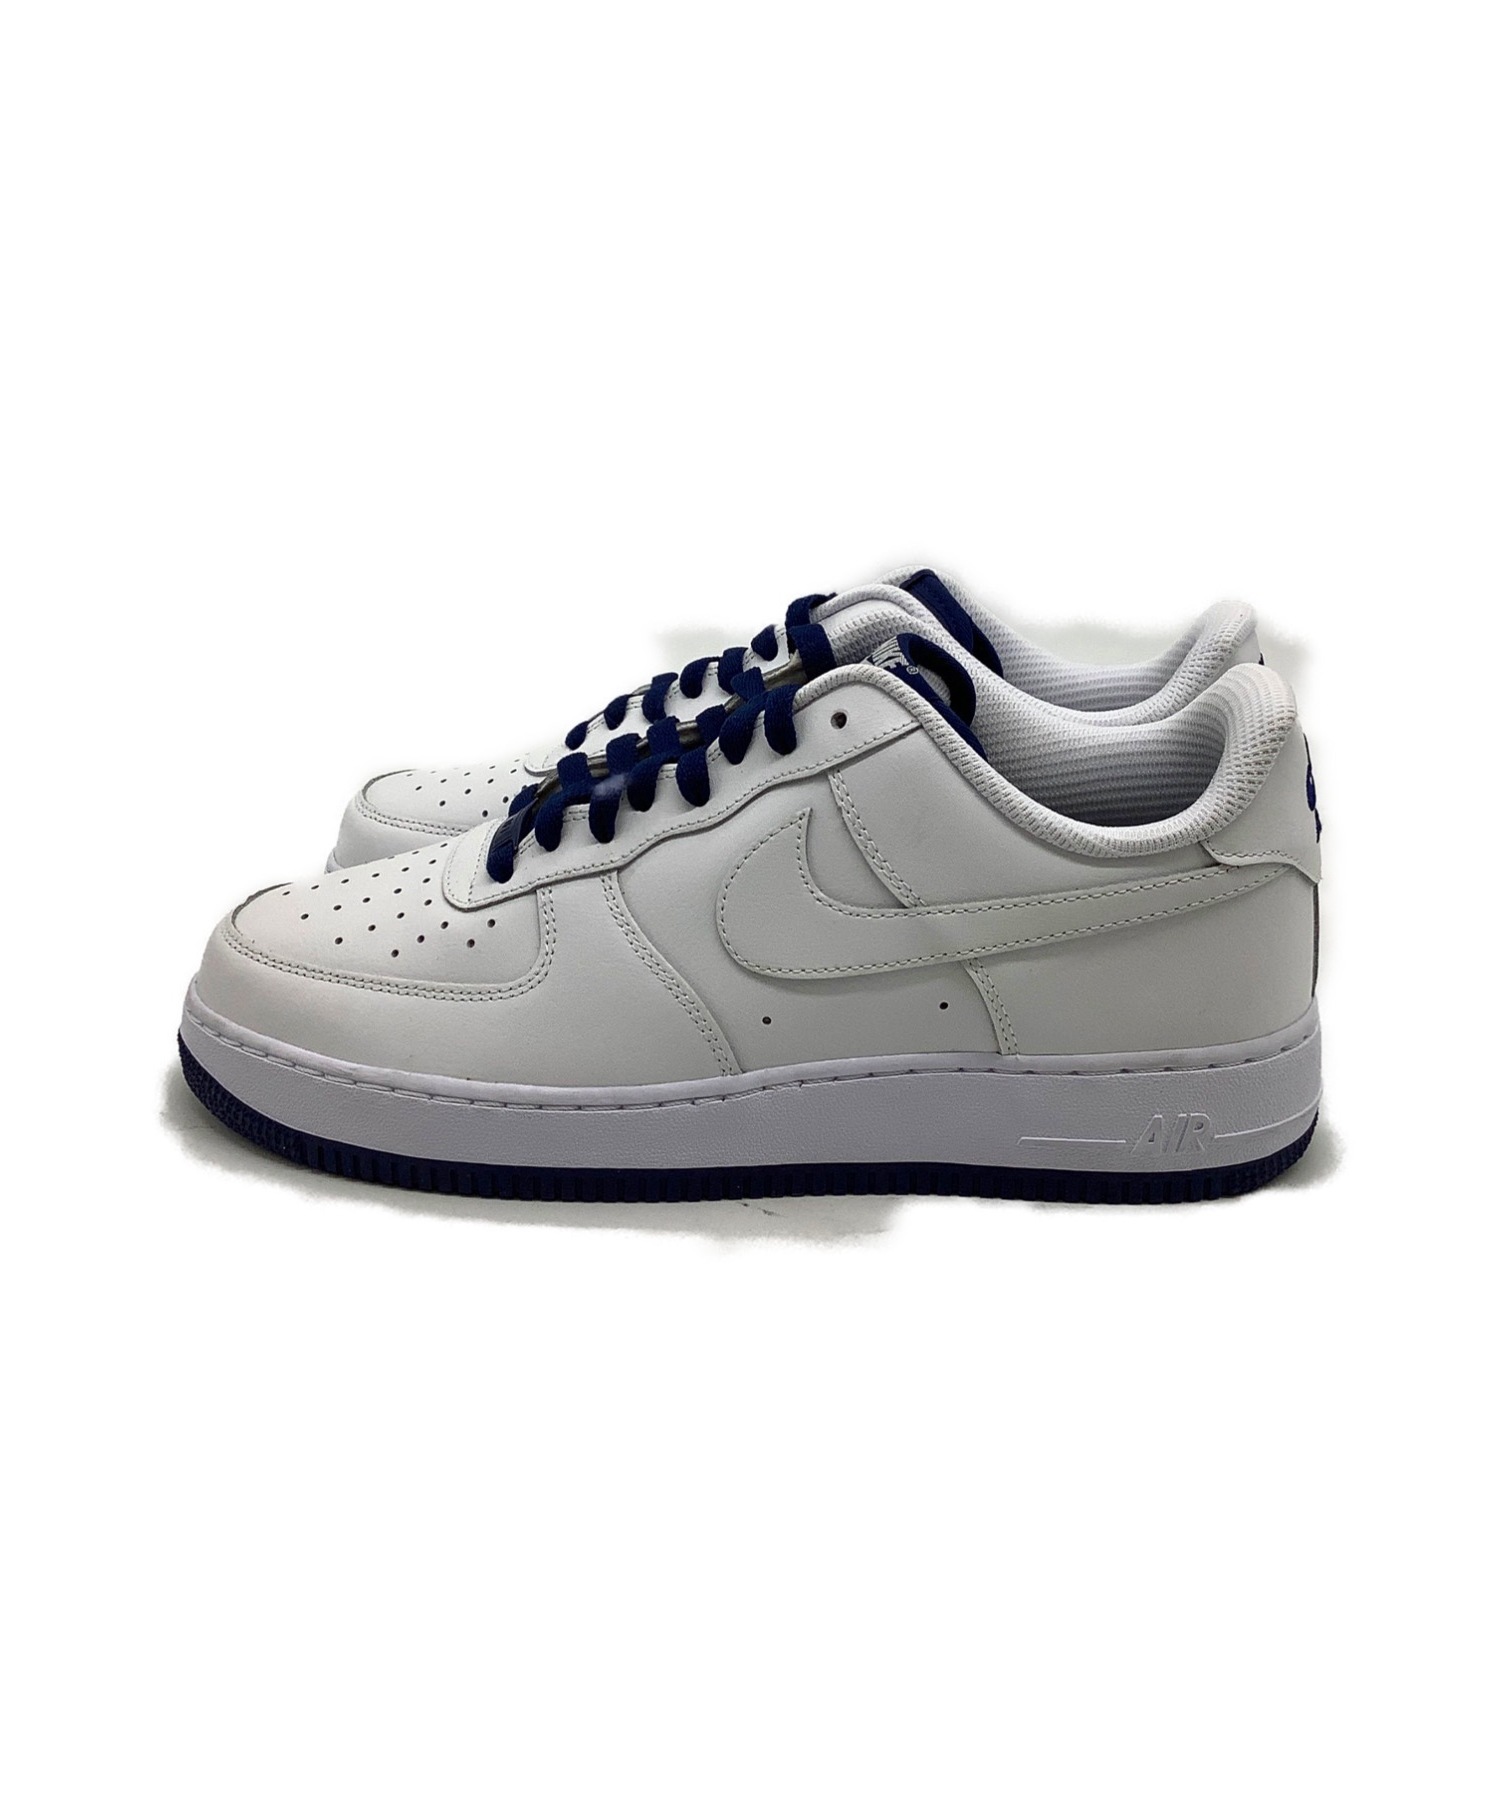 NIKE (ナイキ) AIR FORCE1 LOW By You ホワイト サイズ:28.5cm AIR FORCE1 LOW CT7875-994